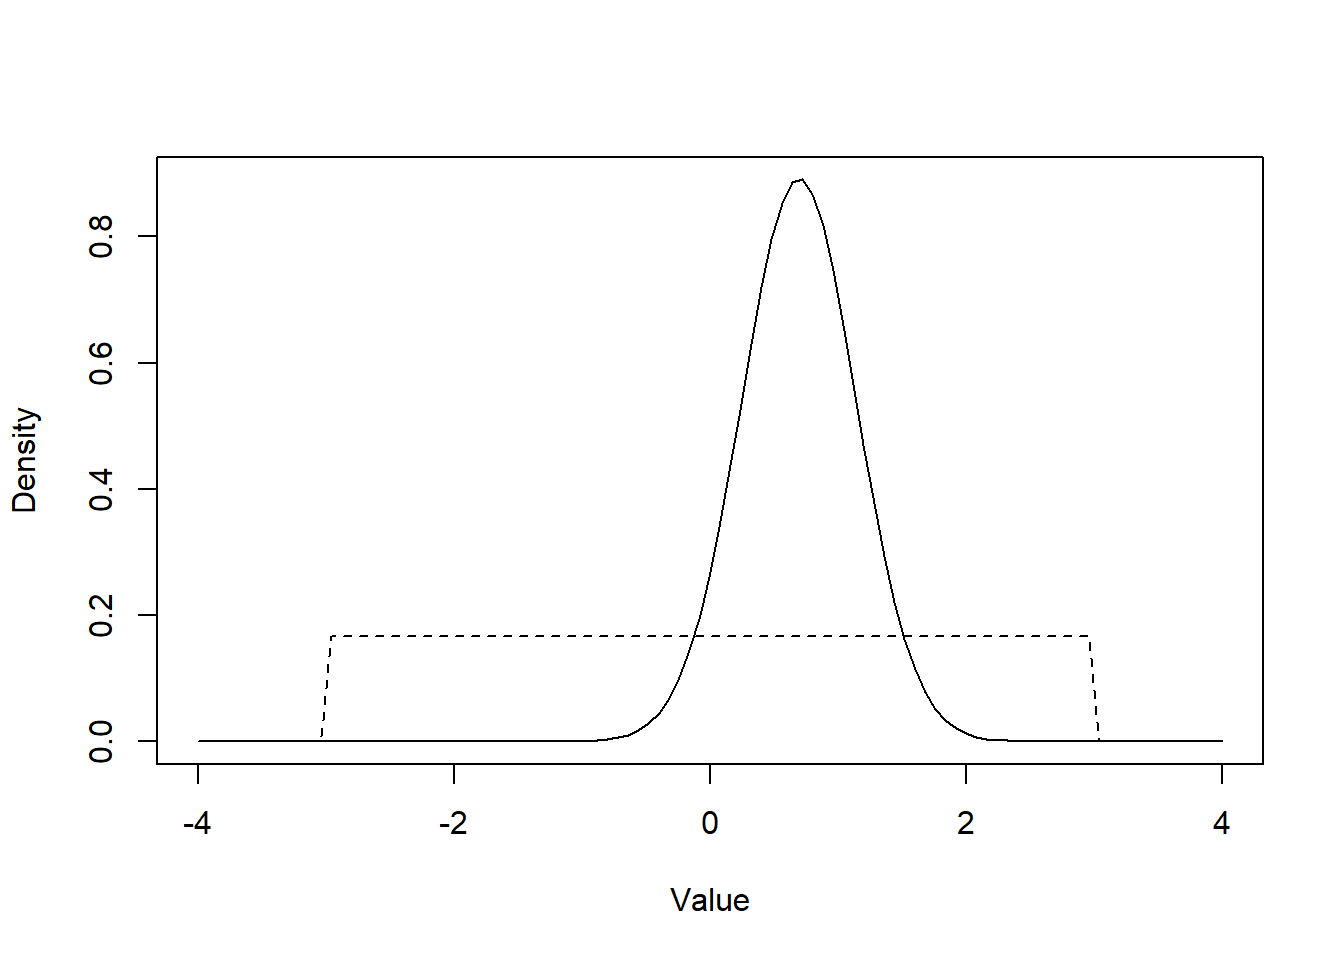 **Figure.** Normal distribution with mean of 0.69 and a variance of 0.20 (full line) *vs.* unif(-2.996, 2.996) distribution.